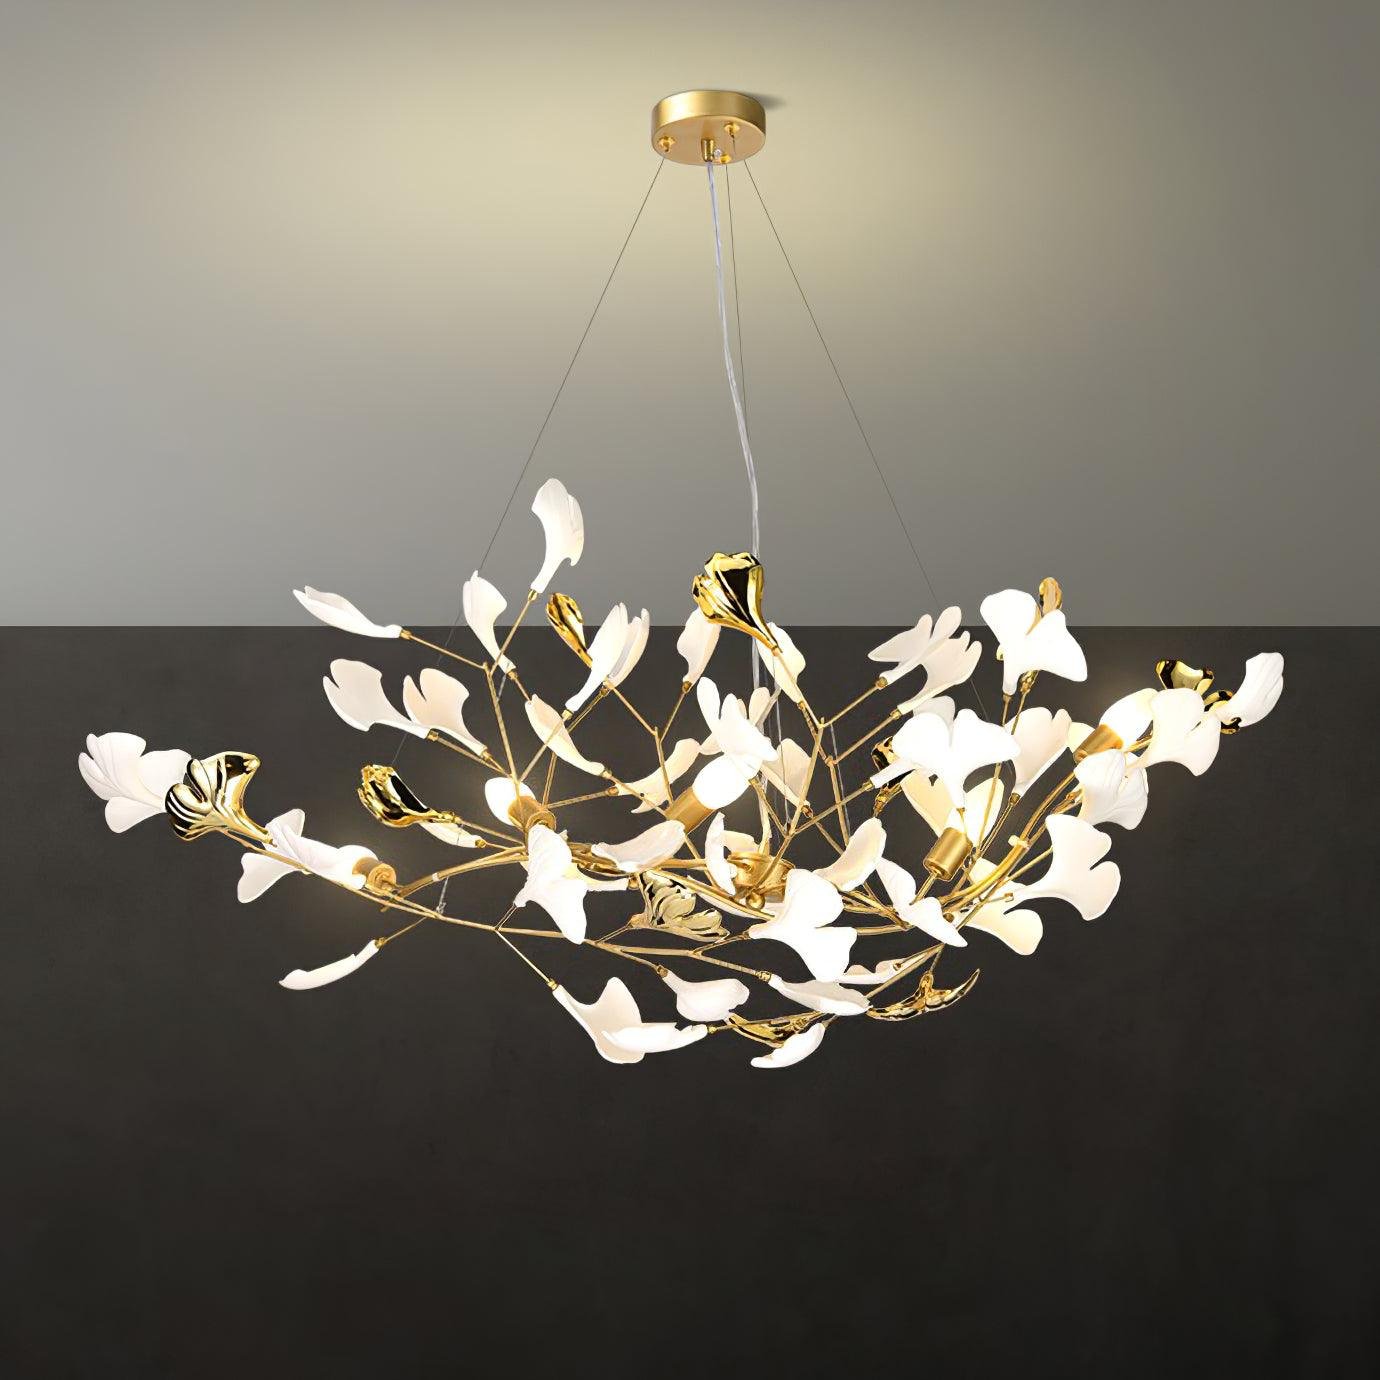 Gingko Chandelier in Gold and White, S L 47.2″ x H 18.9″, L 120cm x H 48cm